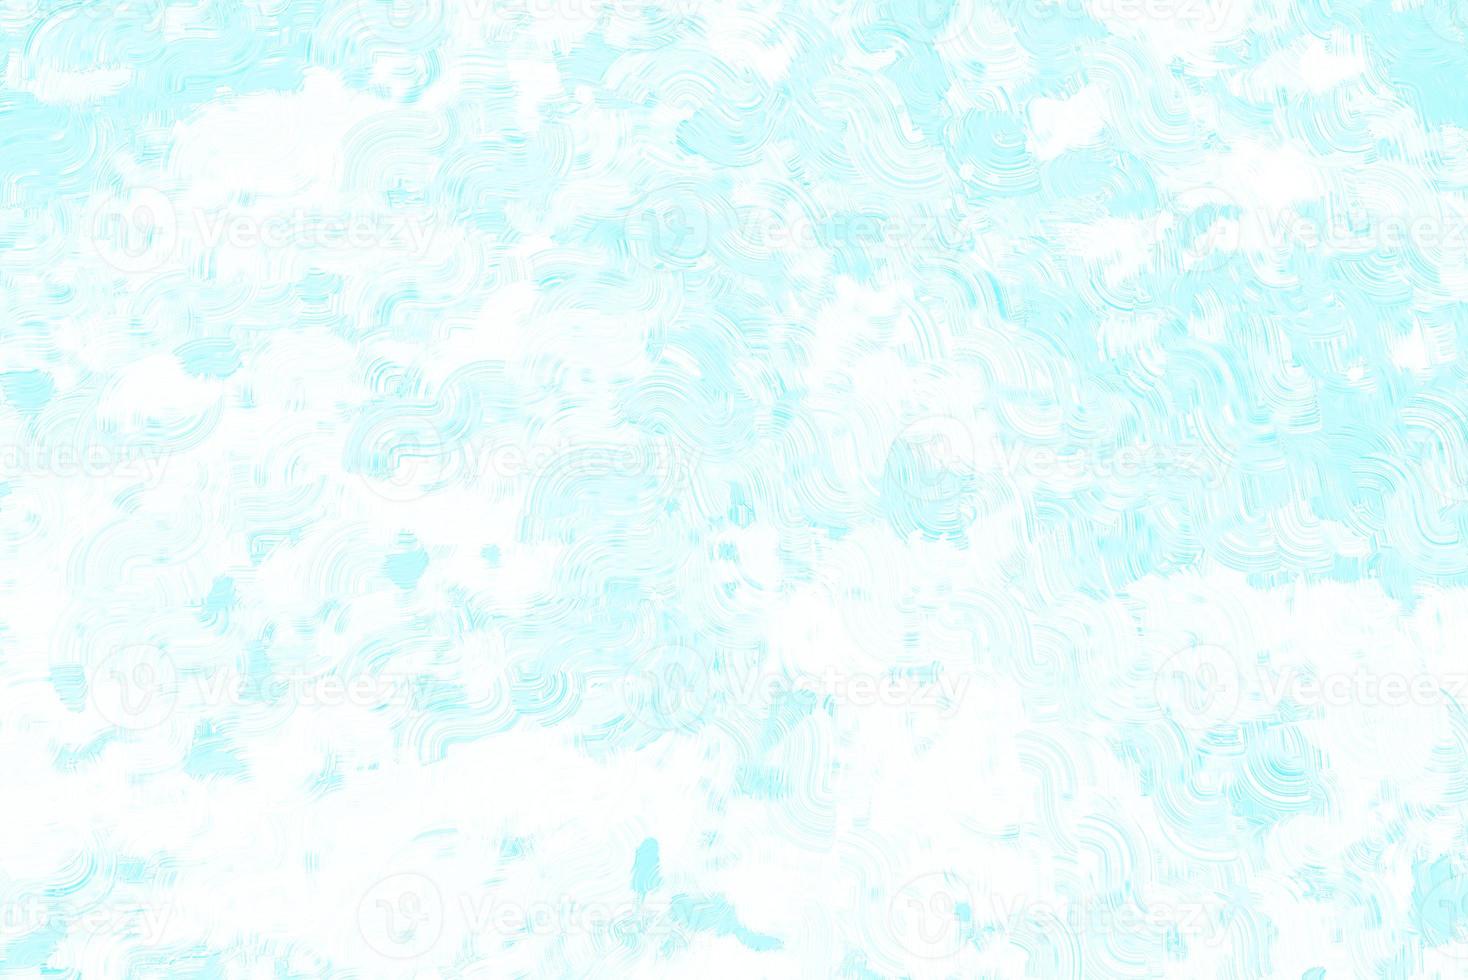 Background texture. Aqua painted abstract background photo